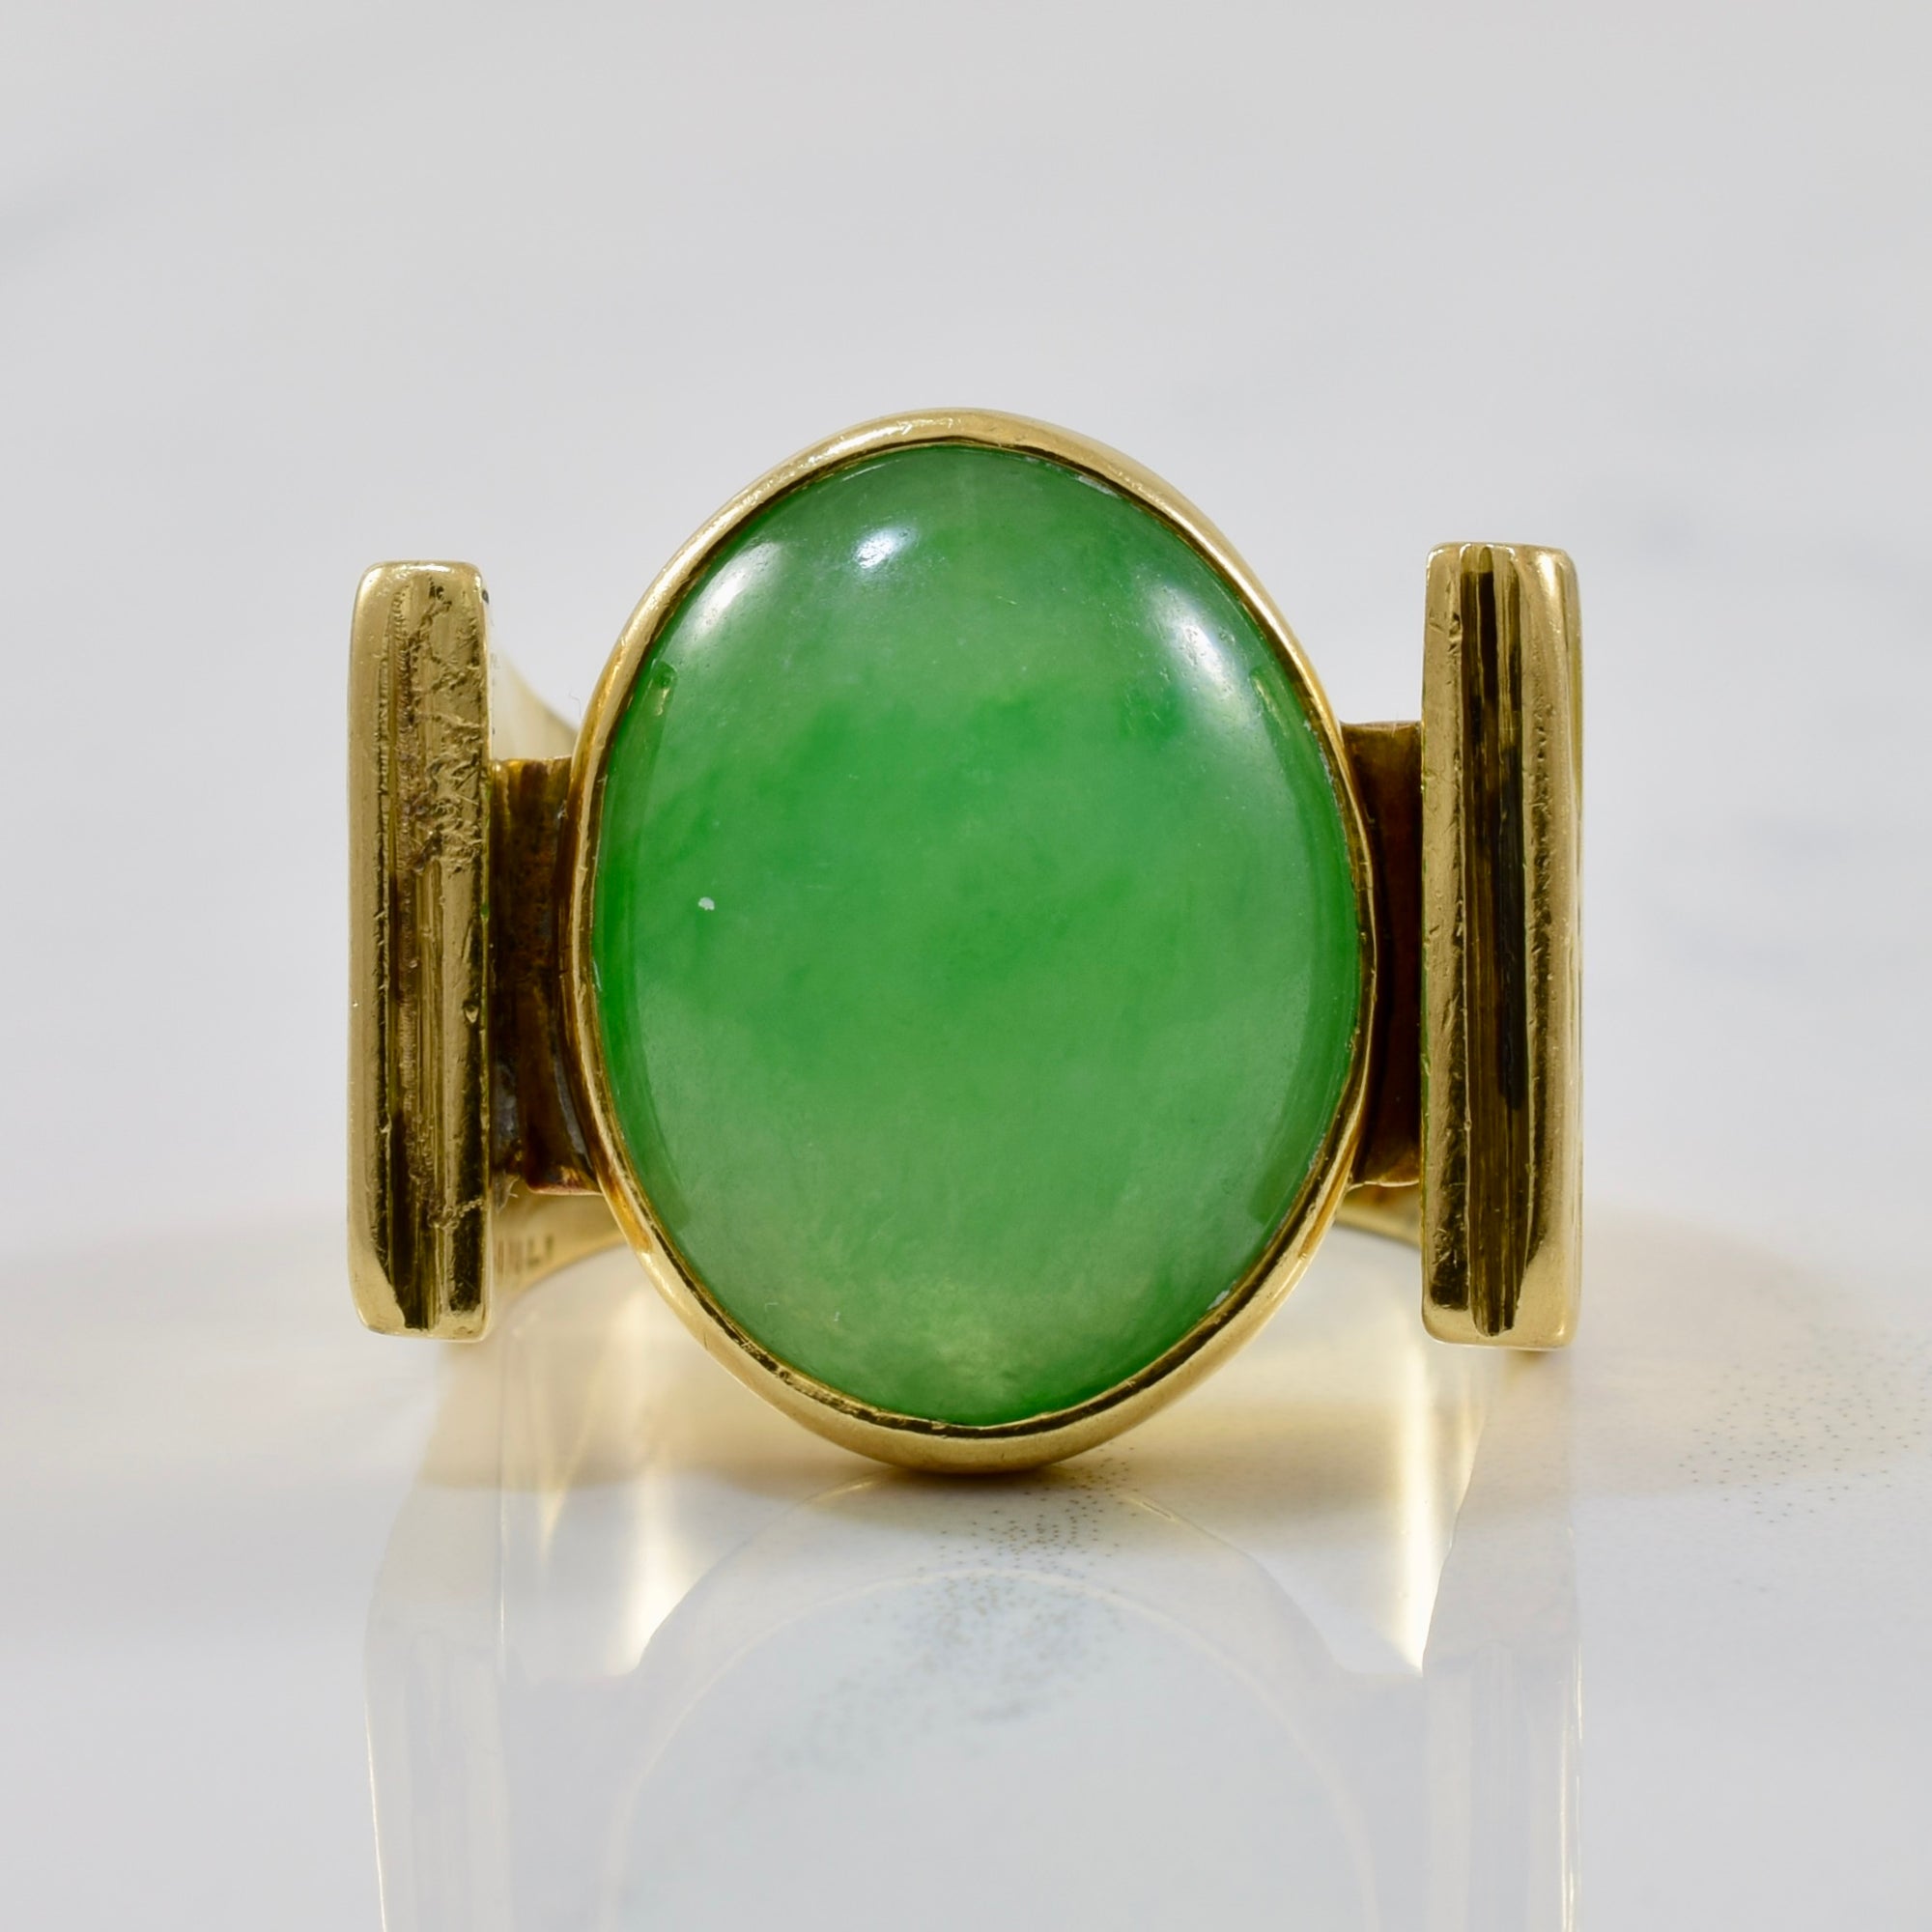 Jade cocktail ring for sale in Canada, vintage cockatail jade ring